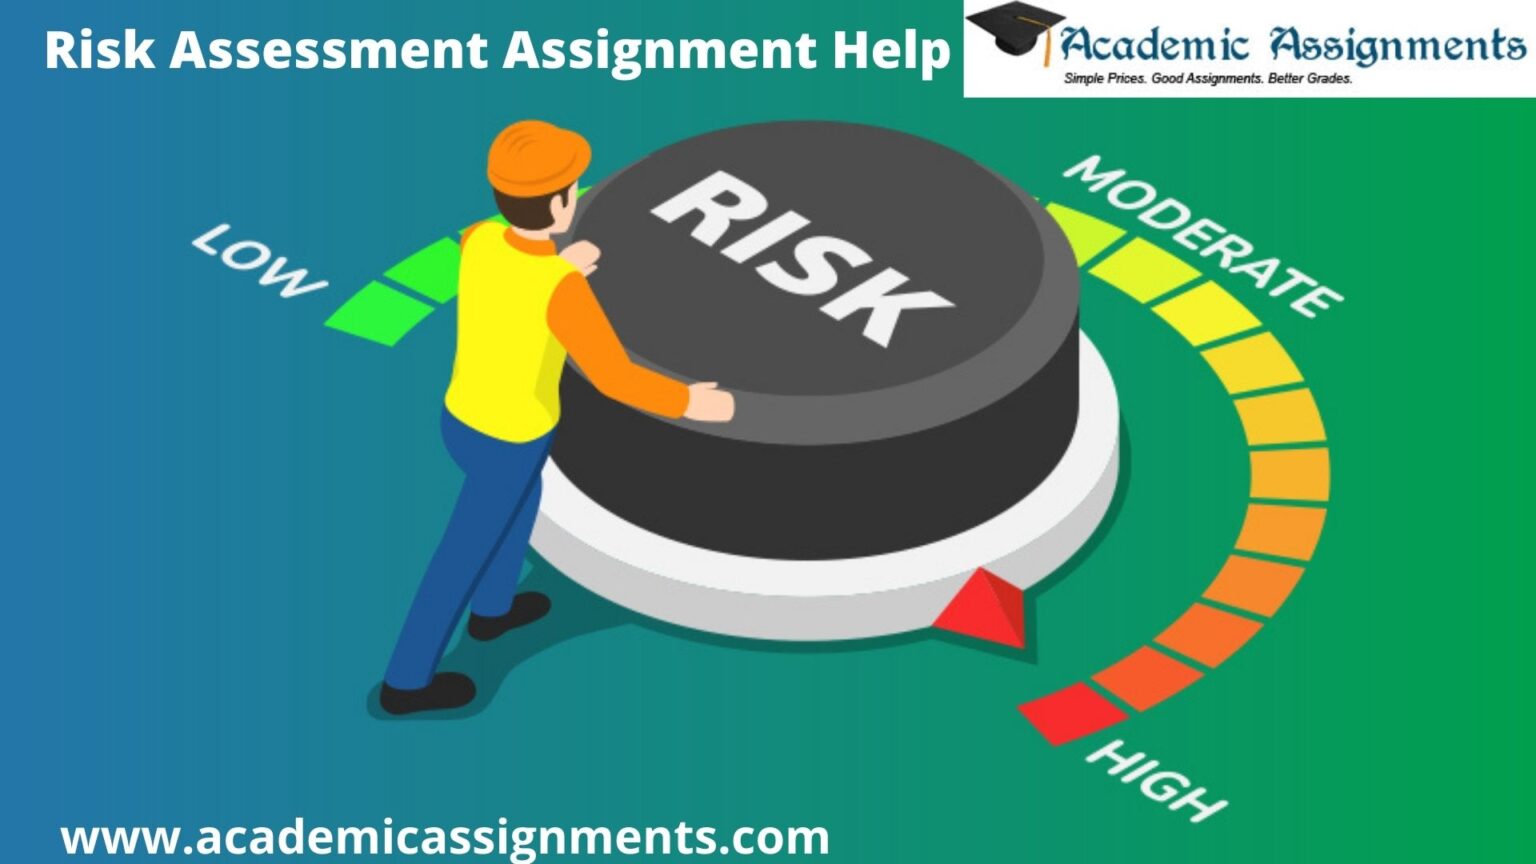 who is at risk of assignment